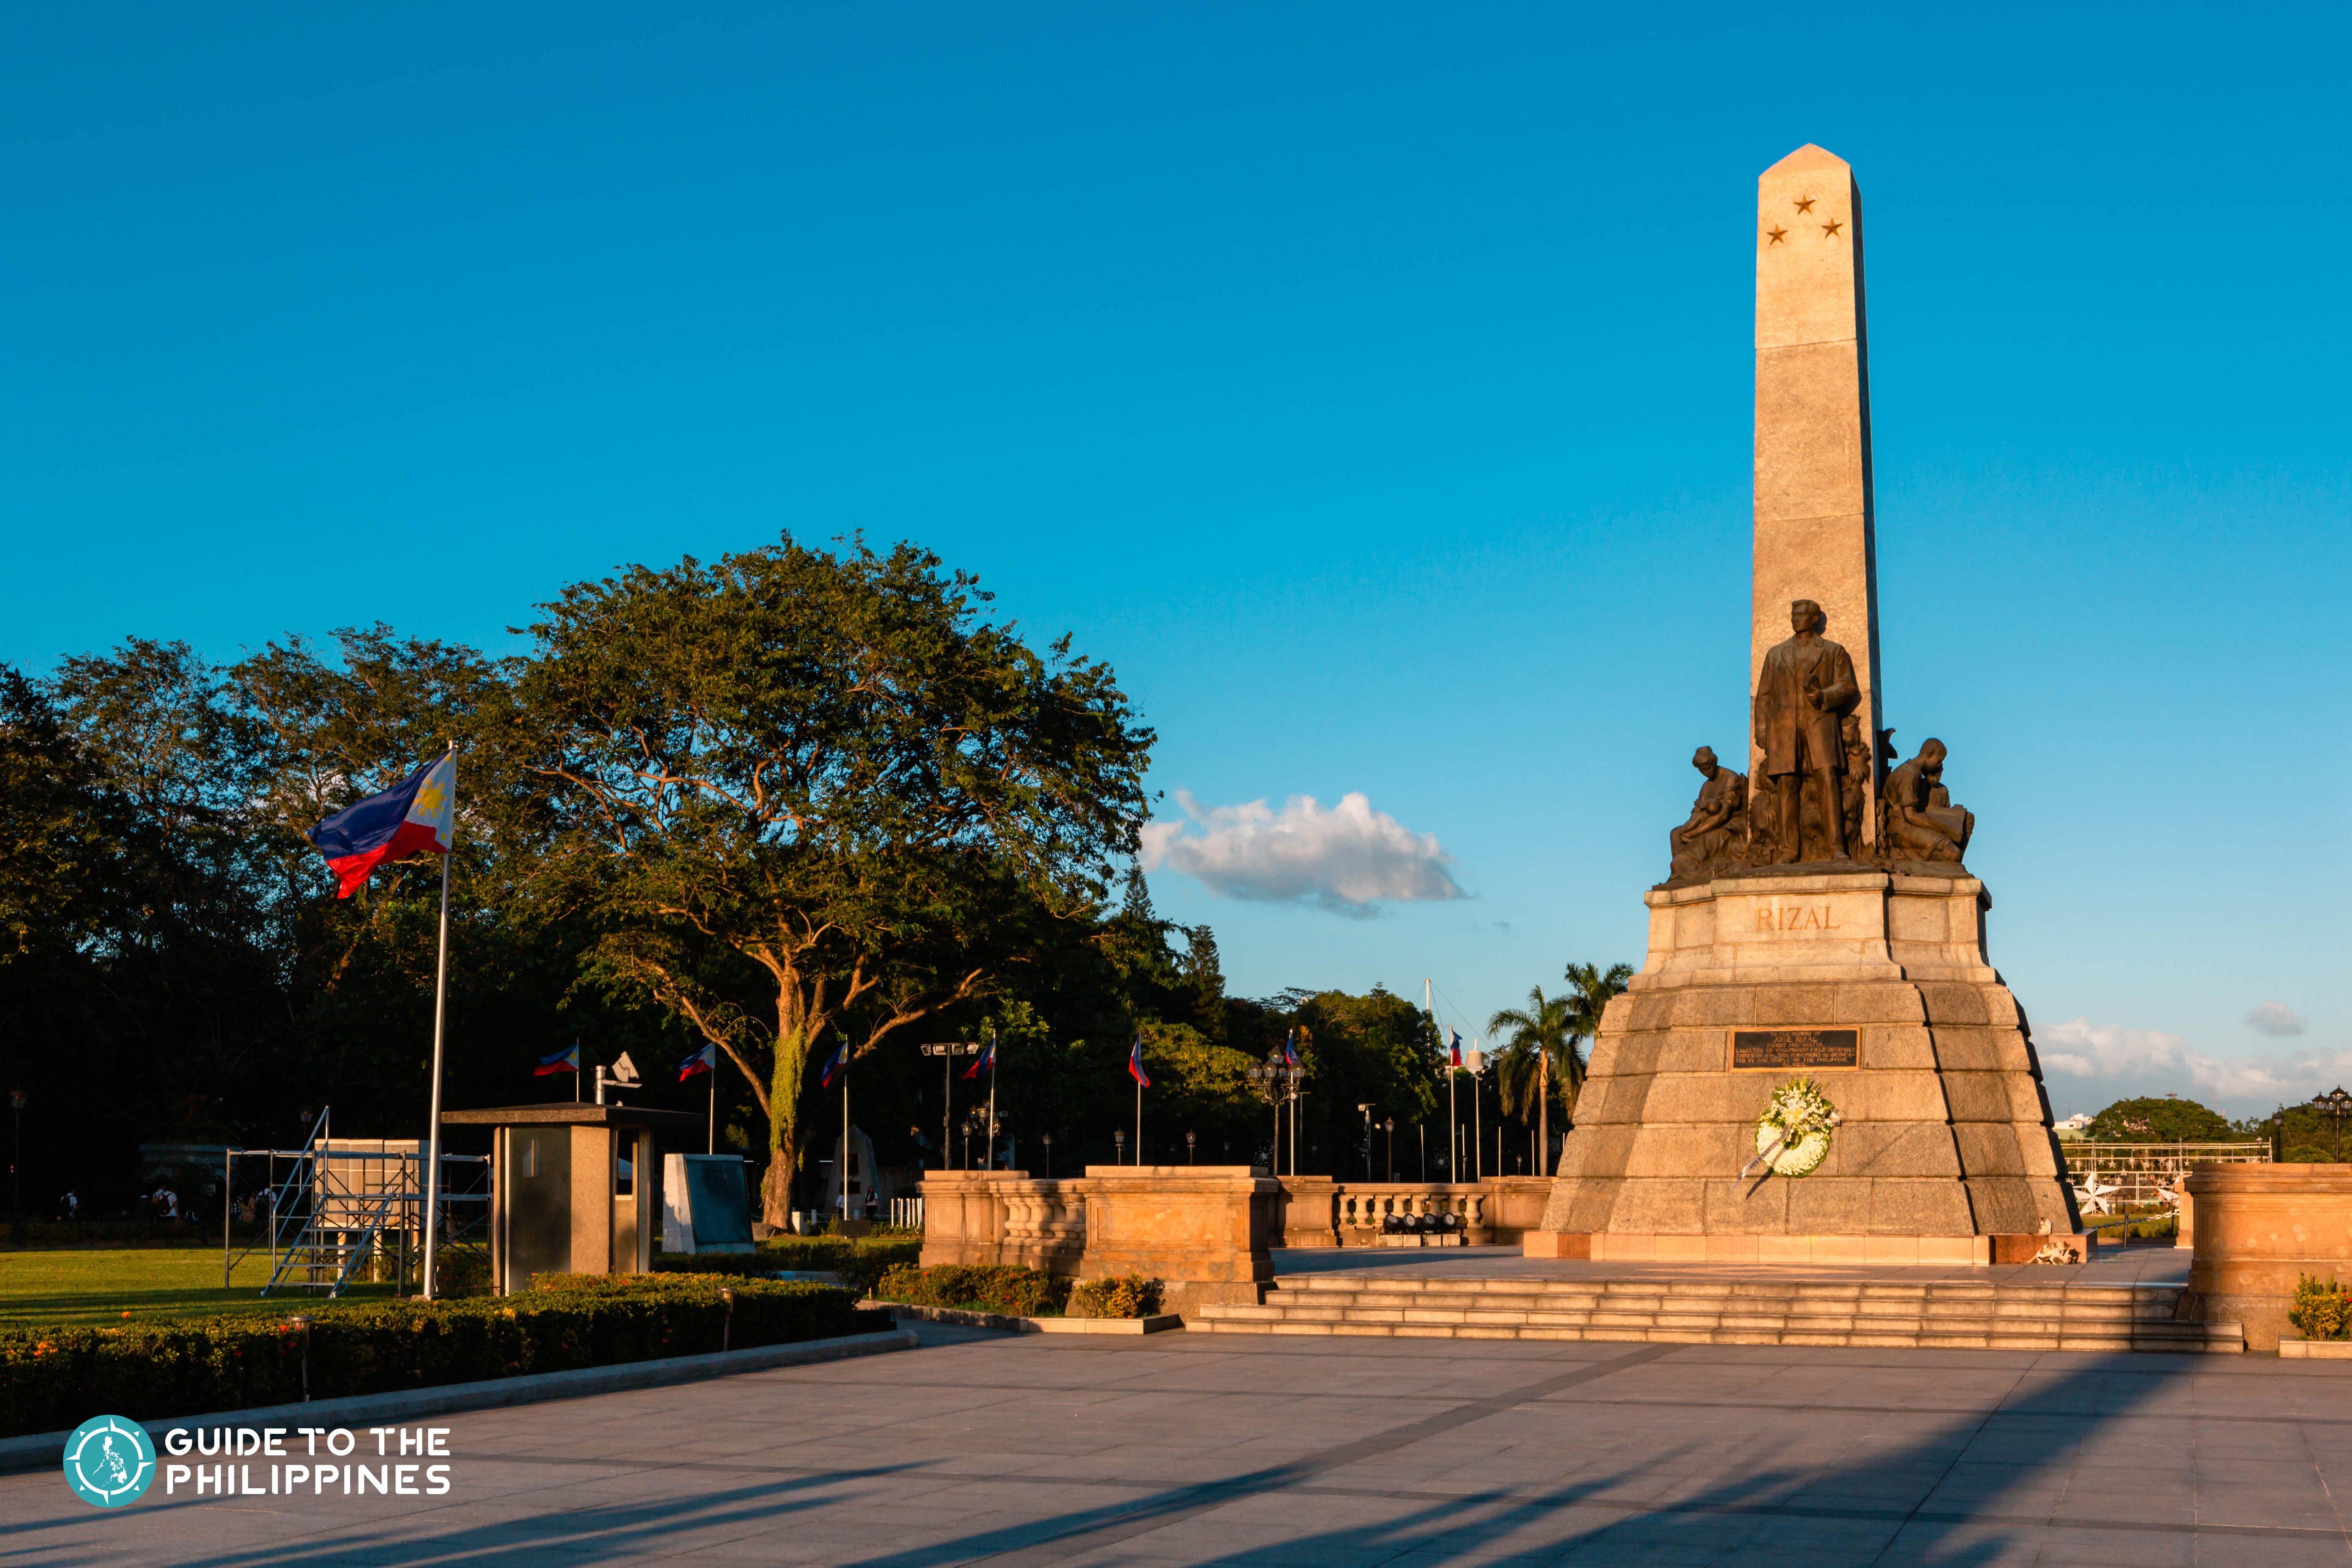 Sunset over Rizal Monument in Manila